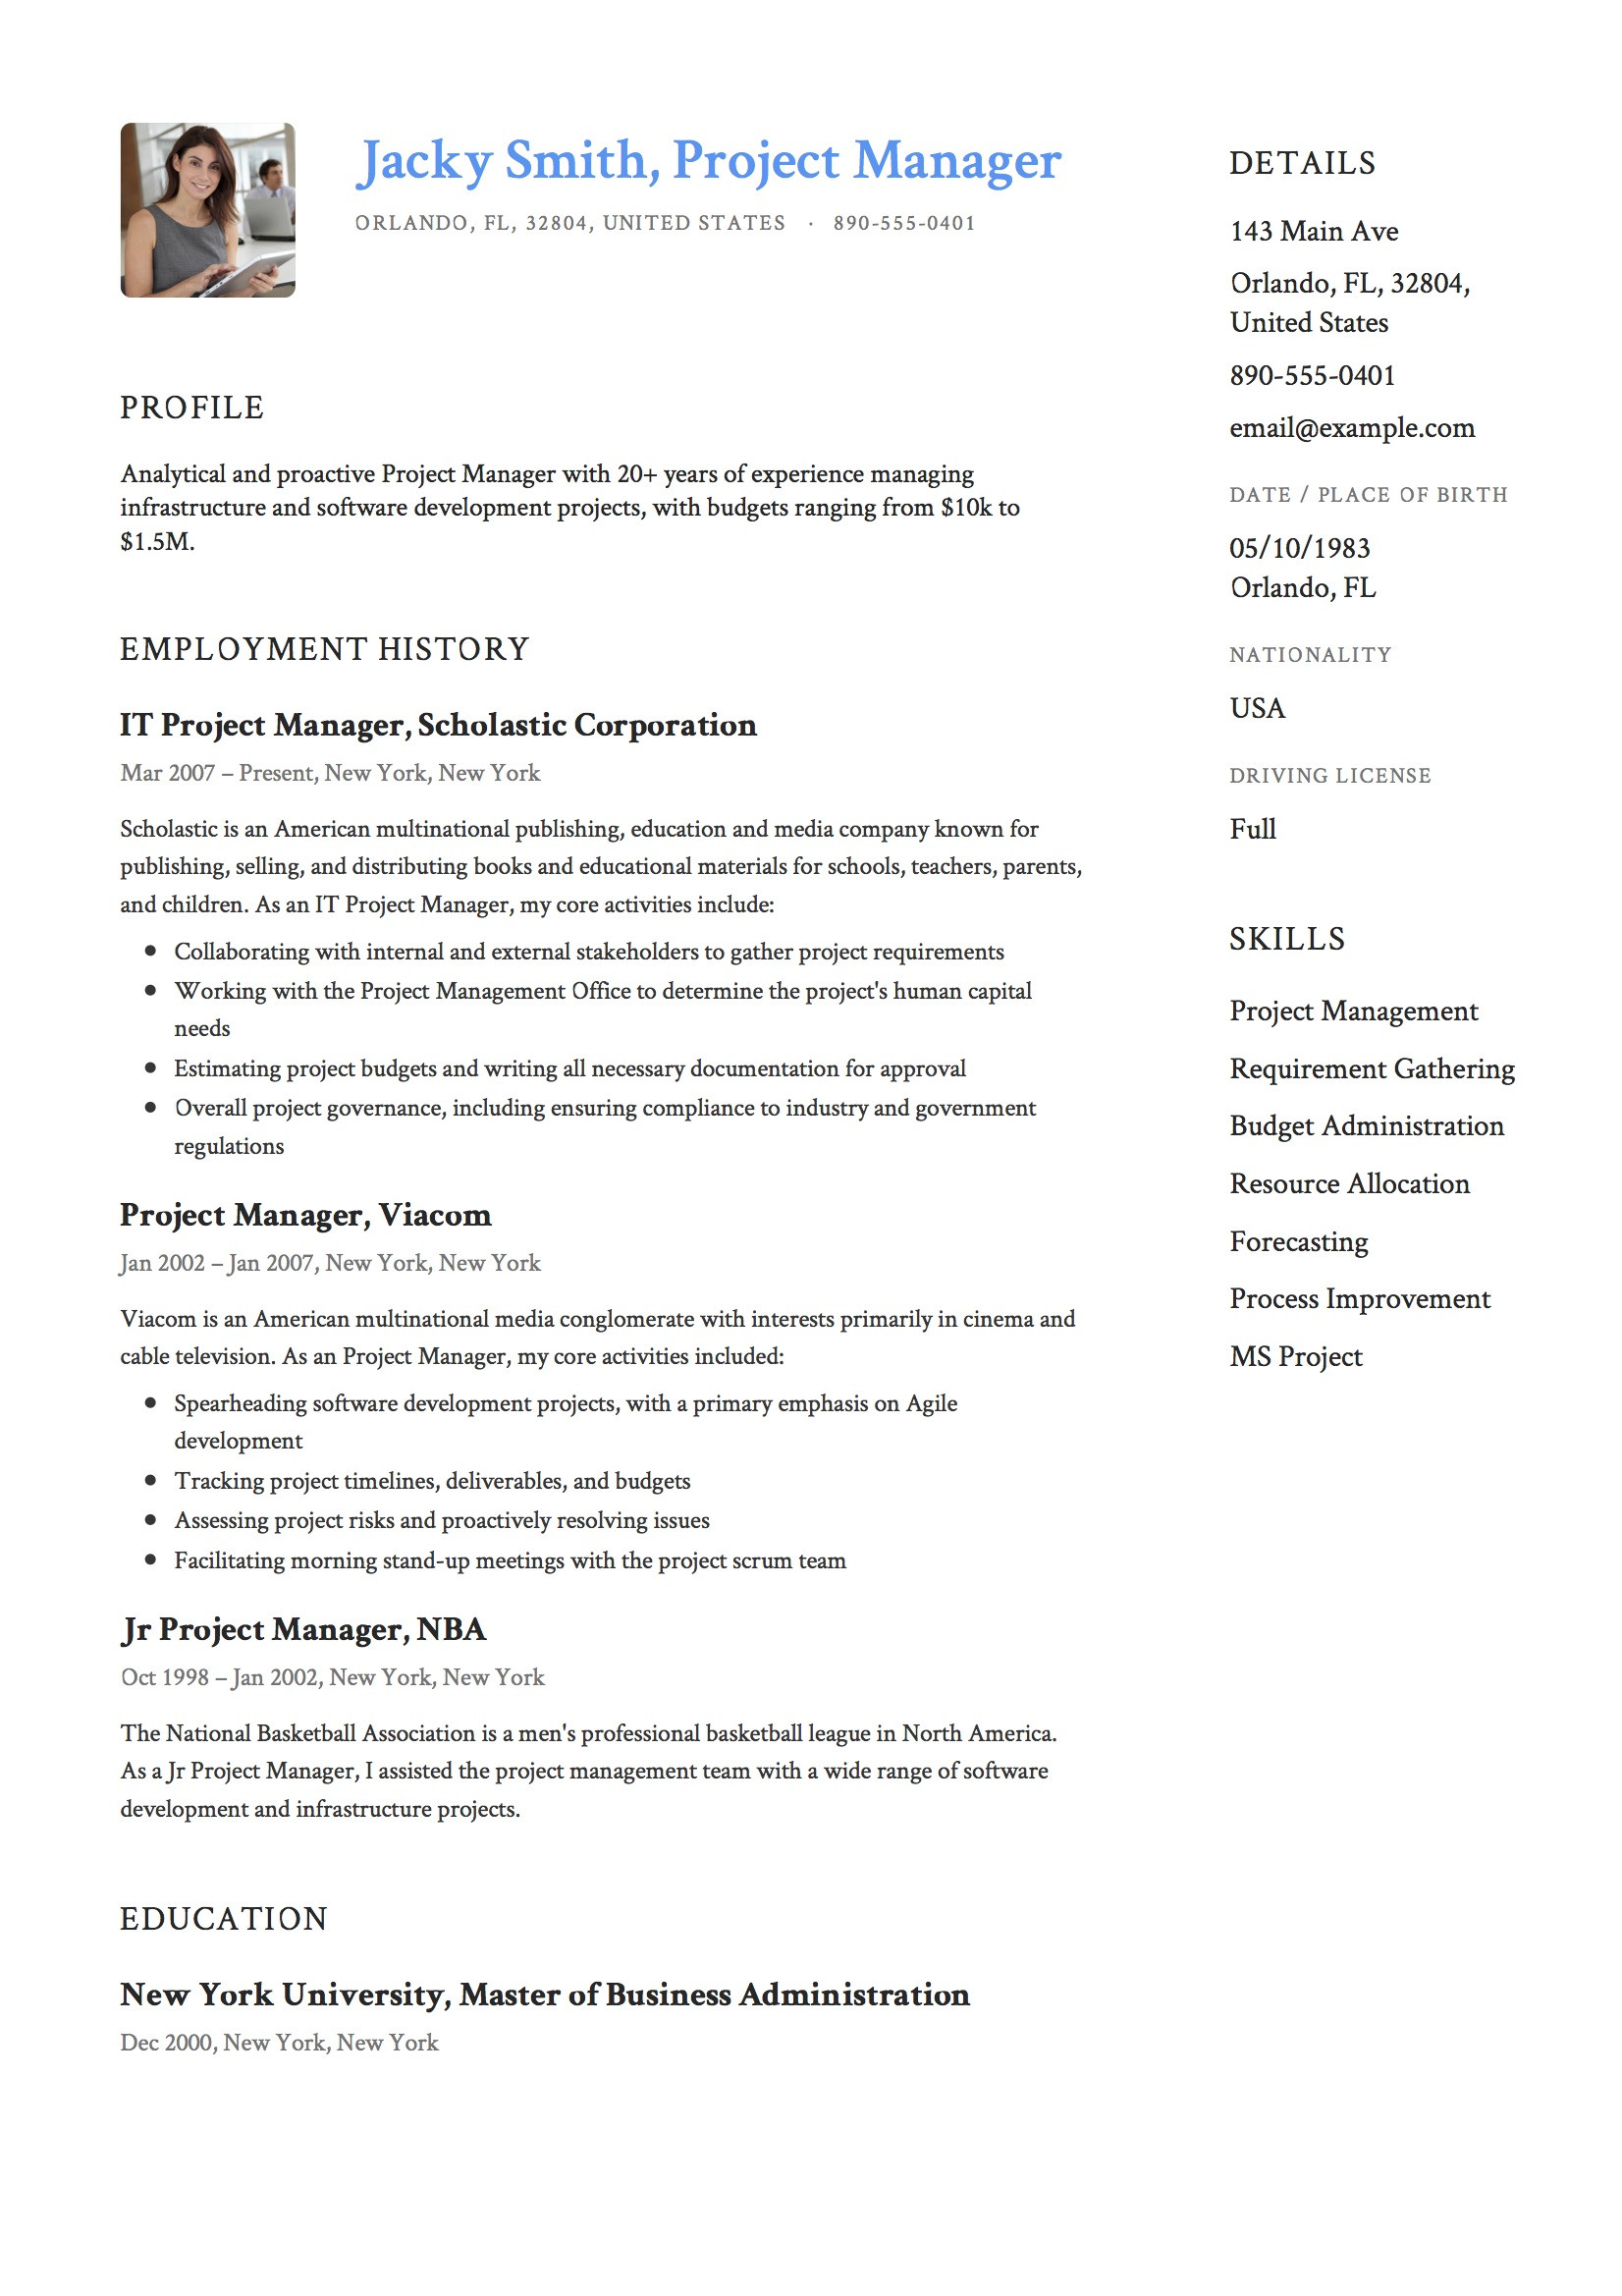 Civil Project Manager Resume Sample India 20 Project Manager Resume Examples & Full Guide Pdf & Word 2021